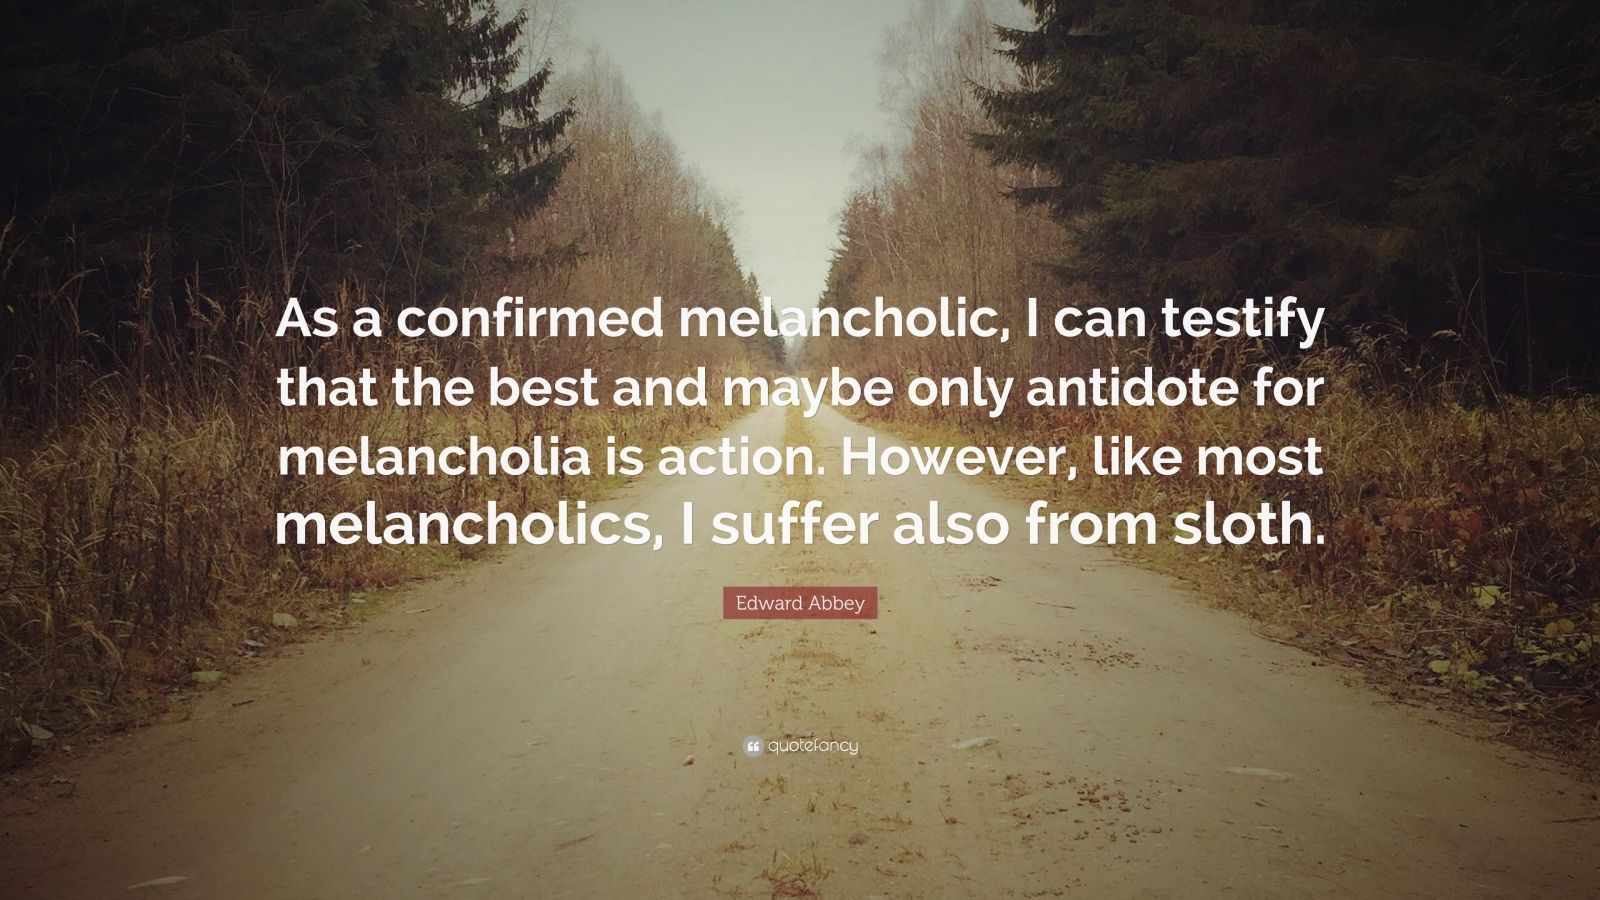 Edward Abbey Quote: “As a confirmed melancholic, I can testify that the best and maybe only antidote for melancholia is action. However, like.” (12 wallpaper)